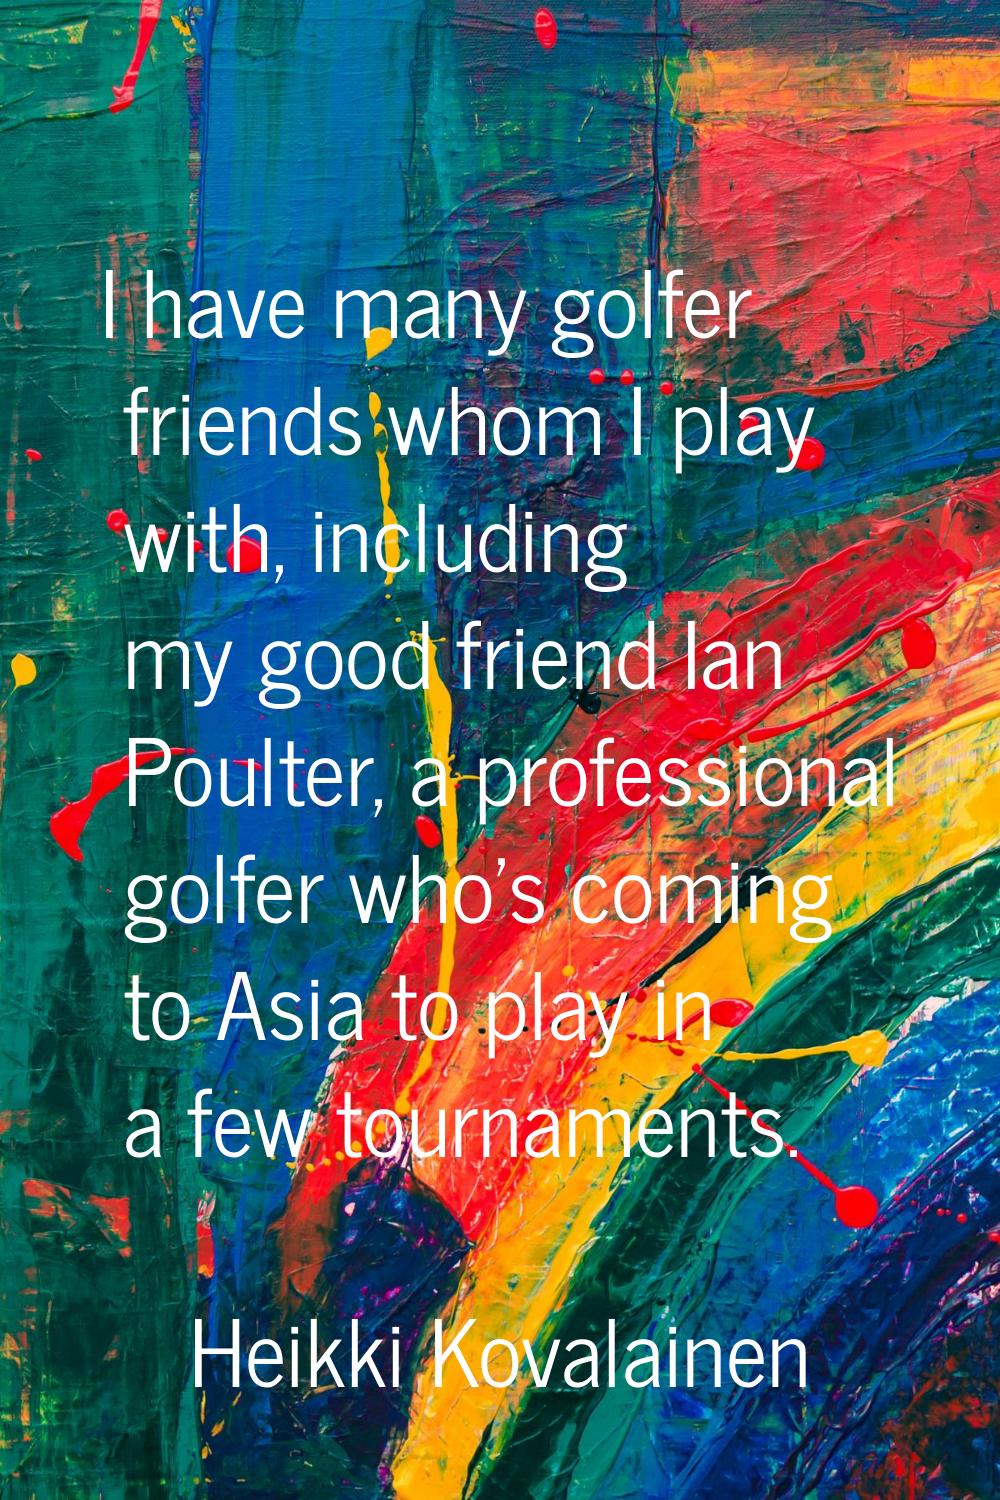 I have many golfer friends whom I play with, including my good friend Ian Poulter, a professional g